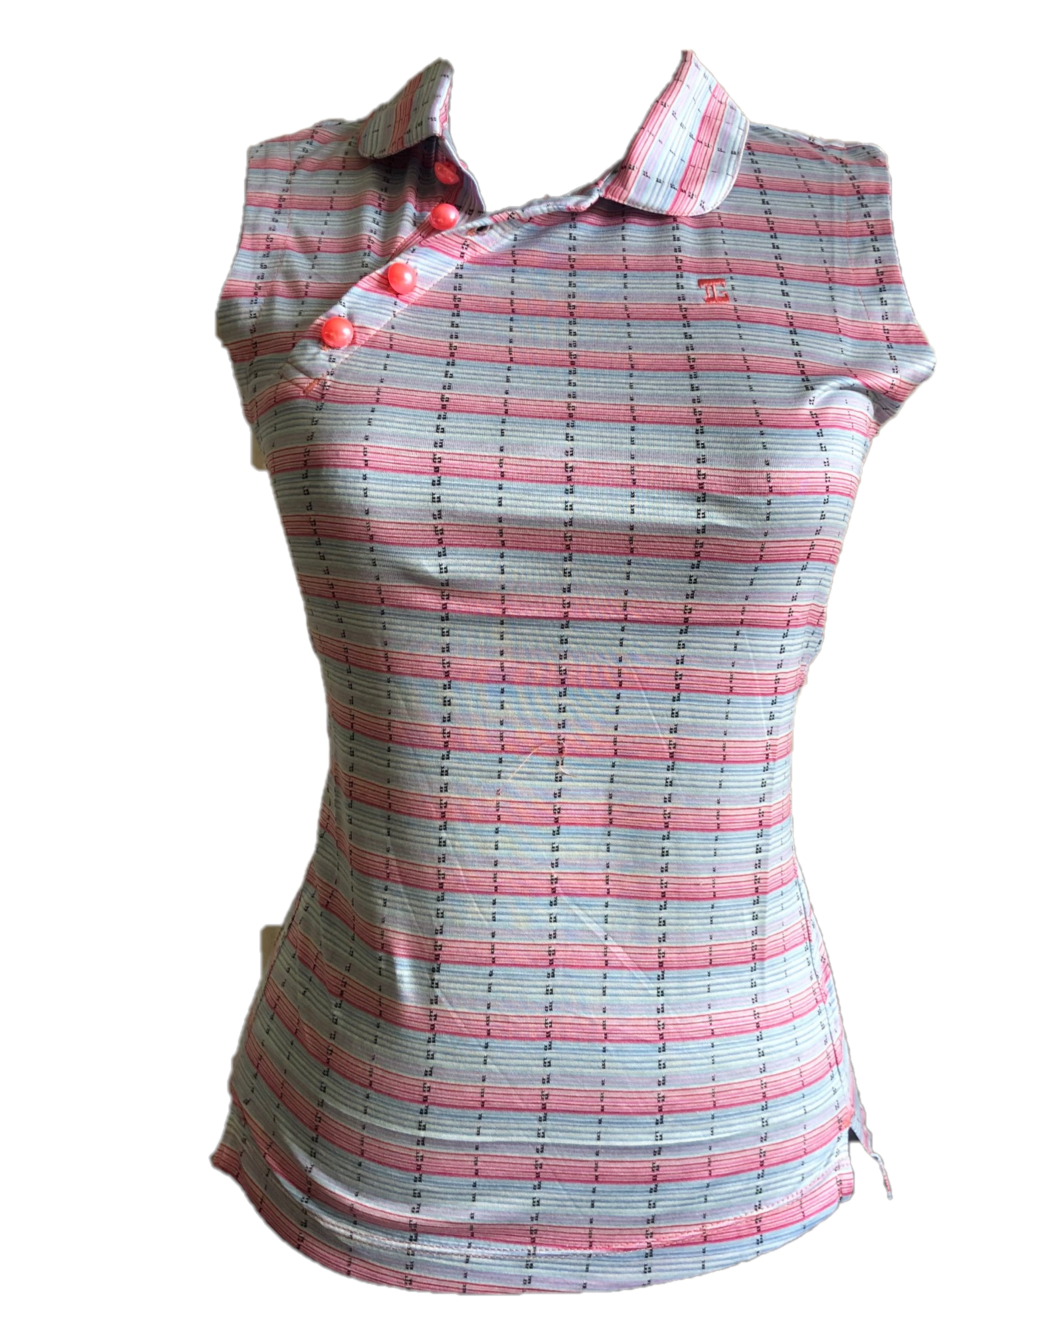 LT-091I || Ladies Sleeveless Top Light Blue, Pink White  Horizontal Bands , Angled 4 Pearl Button Neck.